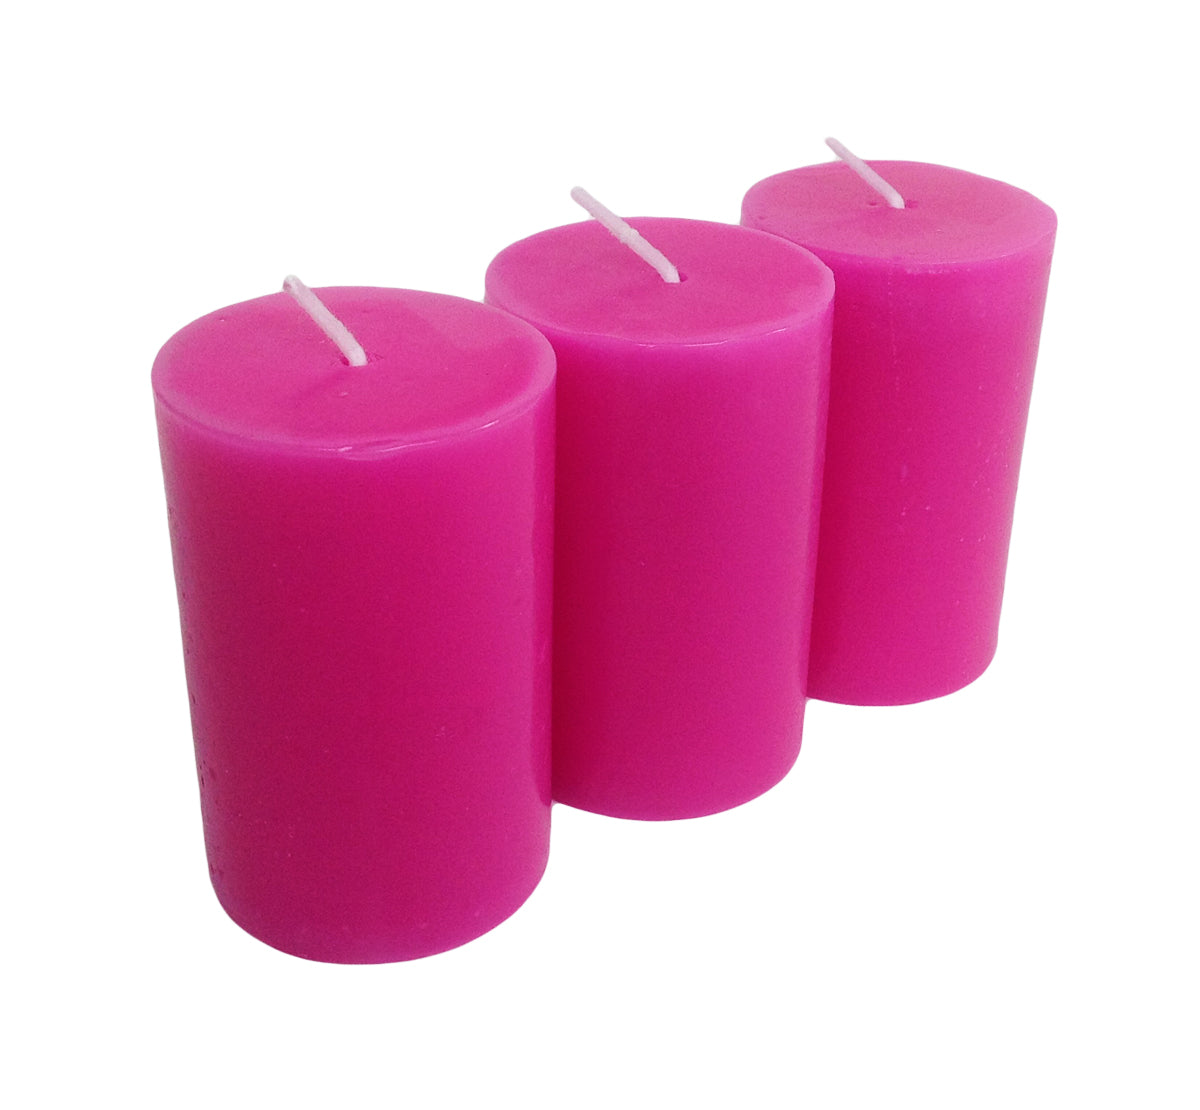 Hot Pink Pillar Candles size 7 x 4.3cm - Pack of 3